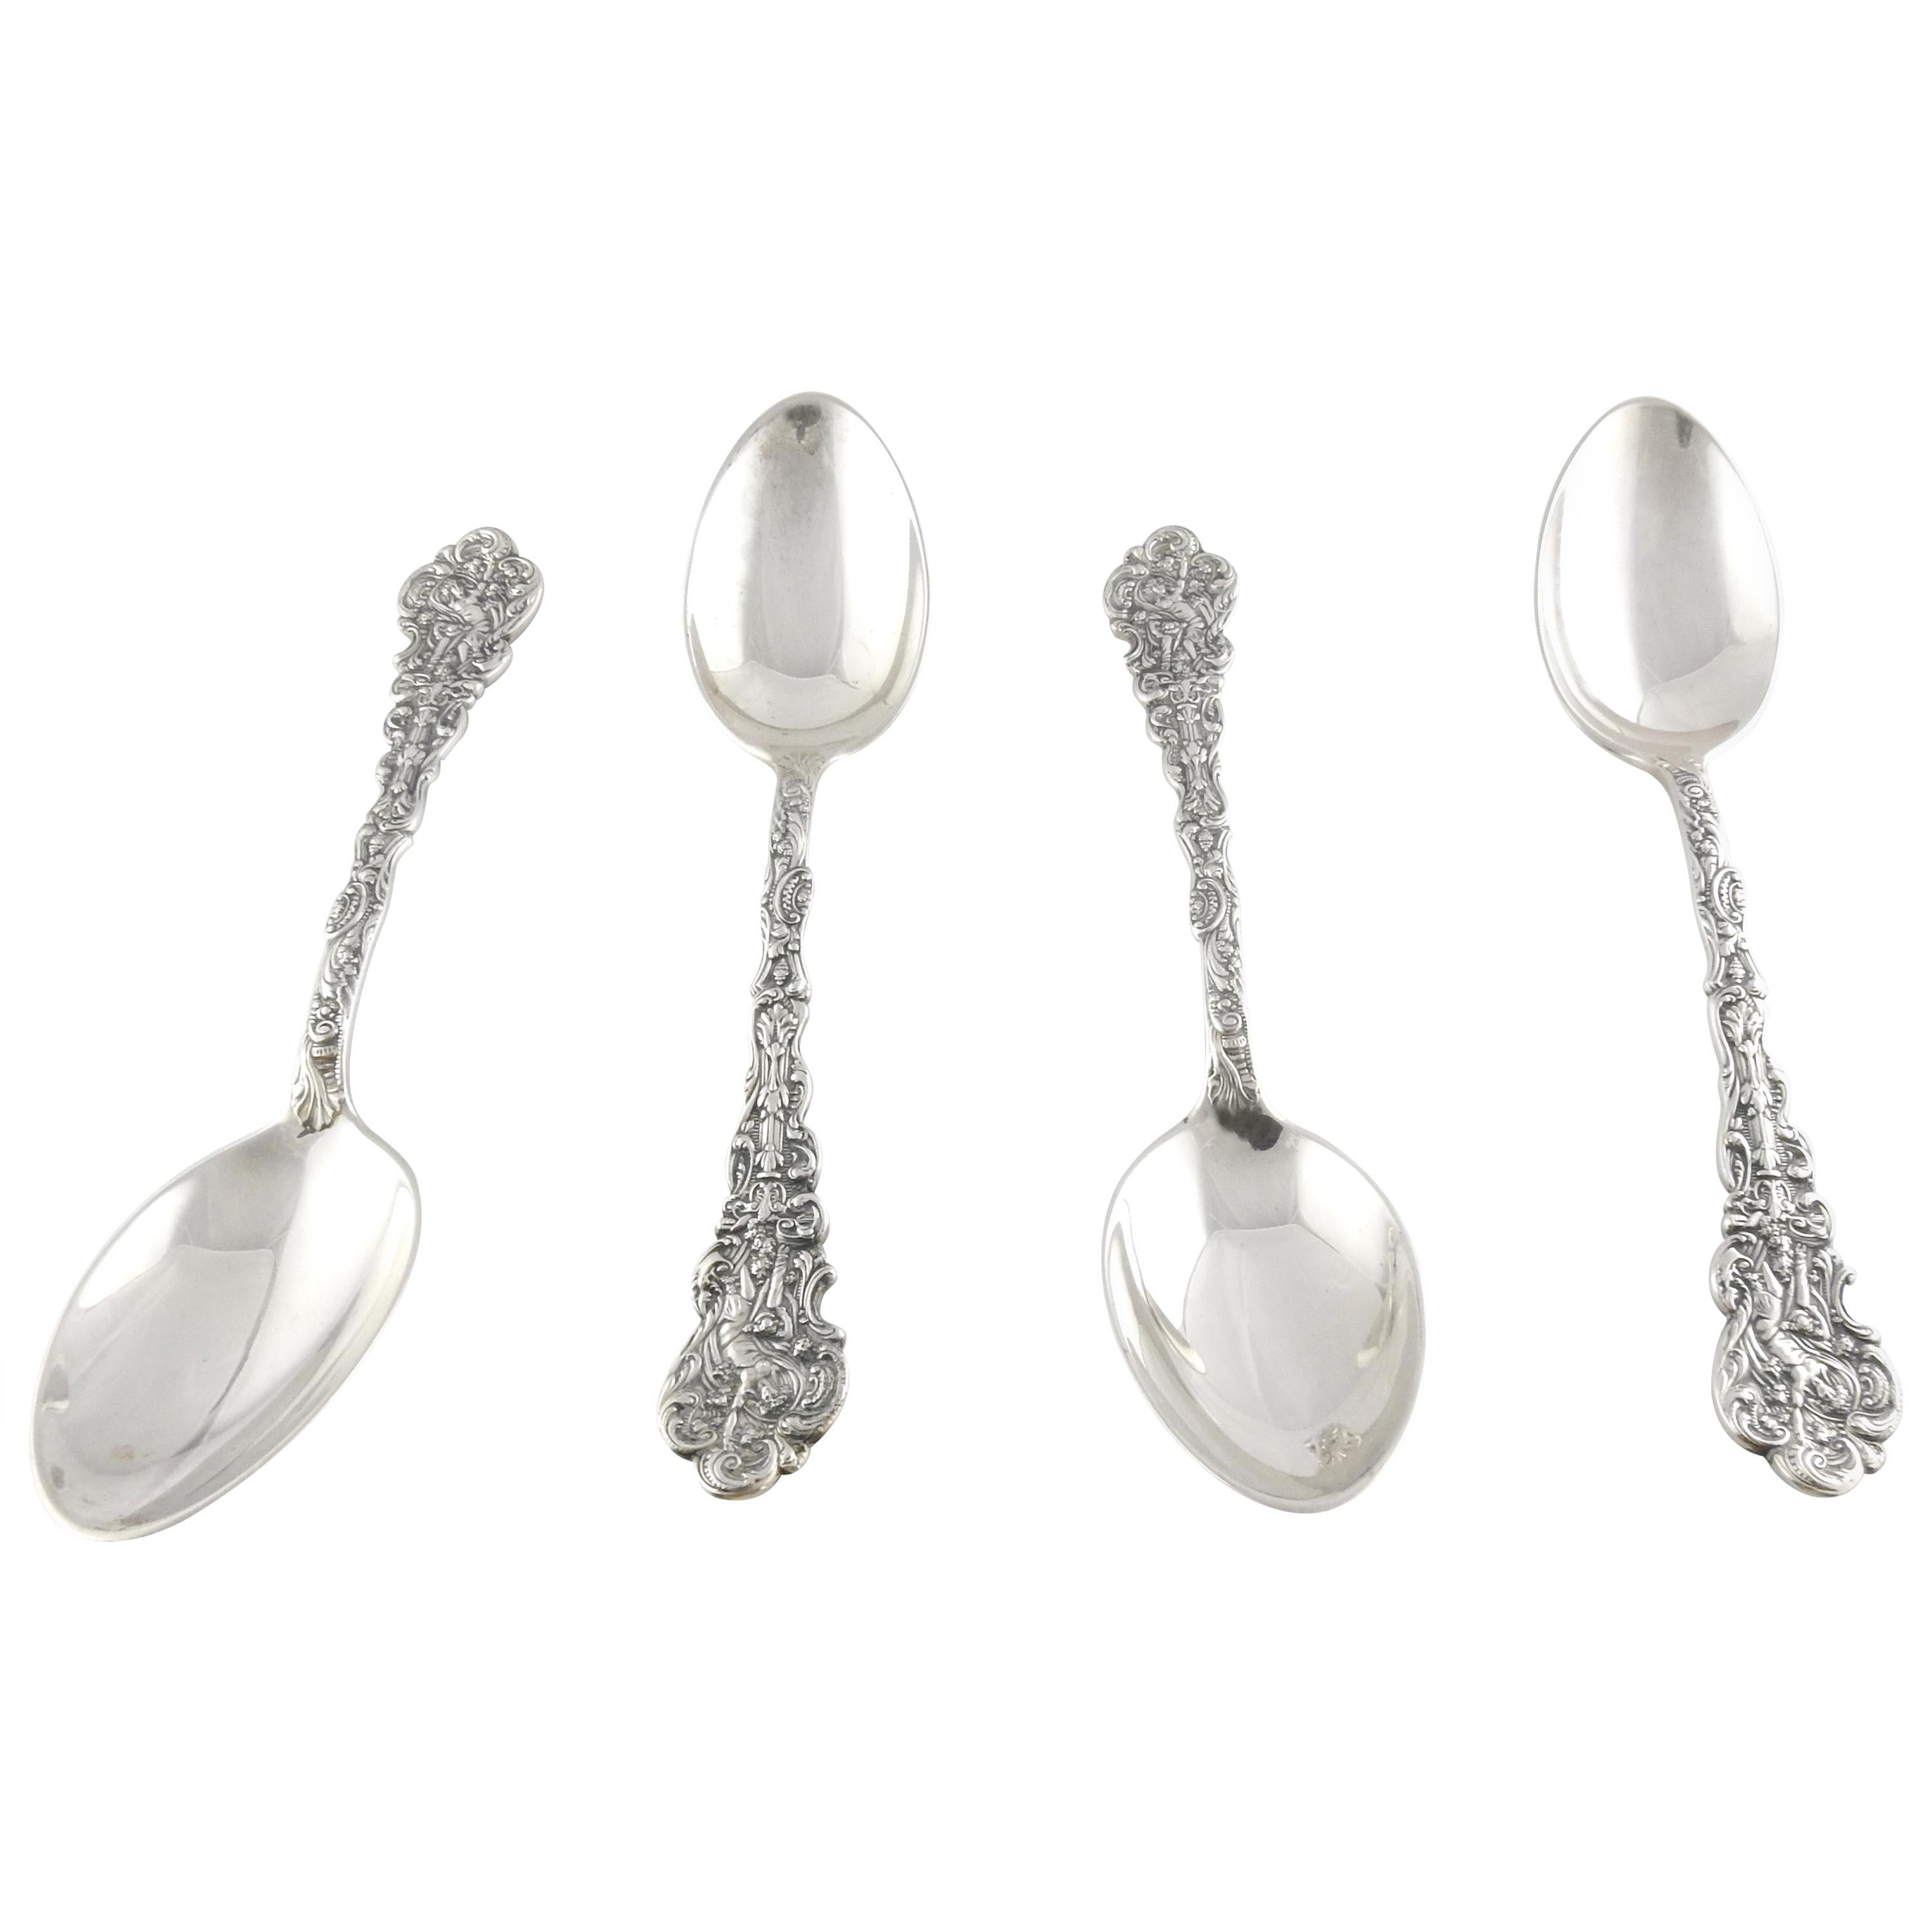 Set of 4 Gorham Versailles Sterling Silver Oval Soup/Dessert Spoon W/Mono For Sale